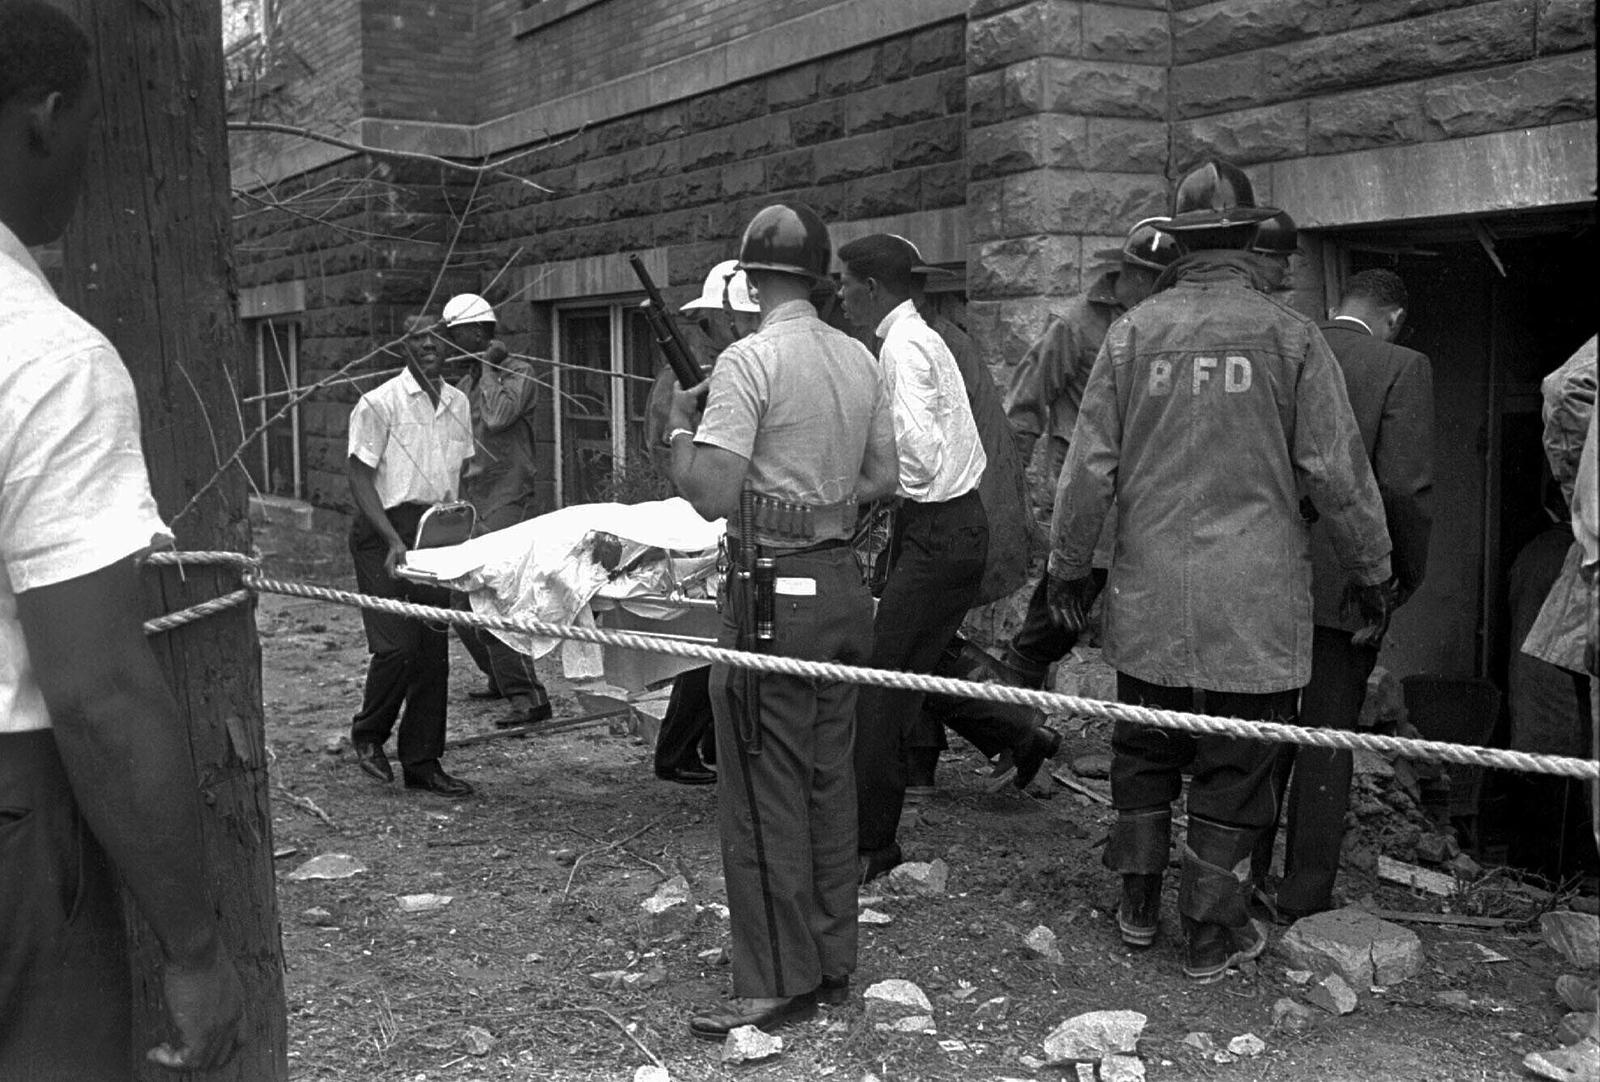 FILE - Firemen and ambulance attendants remove a covered body from Sixteenth Street Baptist Church, where an explosion ripped though the structure during services, killing four black girls, on Sept. 15, 1963. Sarah Collins Rudolph lost an eye and has pieces of glass inside her body from a Ku Klux Klan bombing that killed her sister and three other Black girls inside the Alabama church. (AP Photo, File)